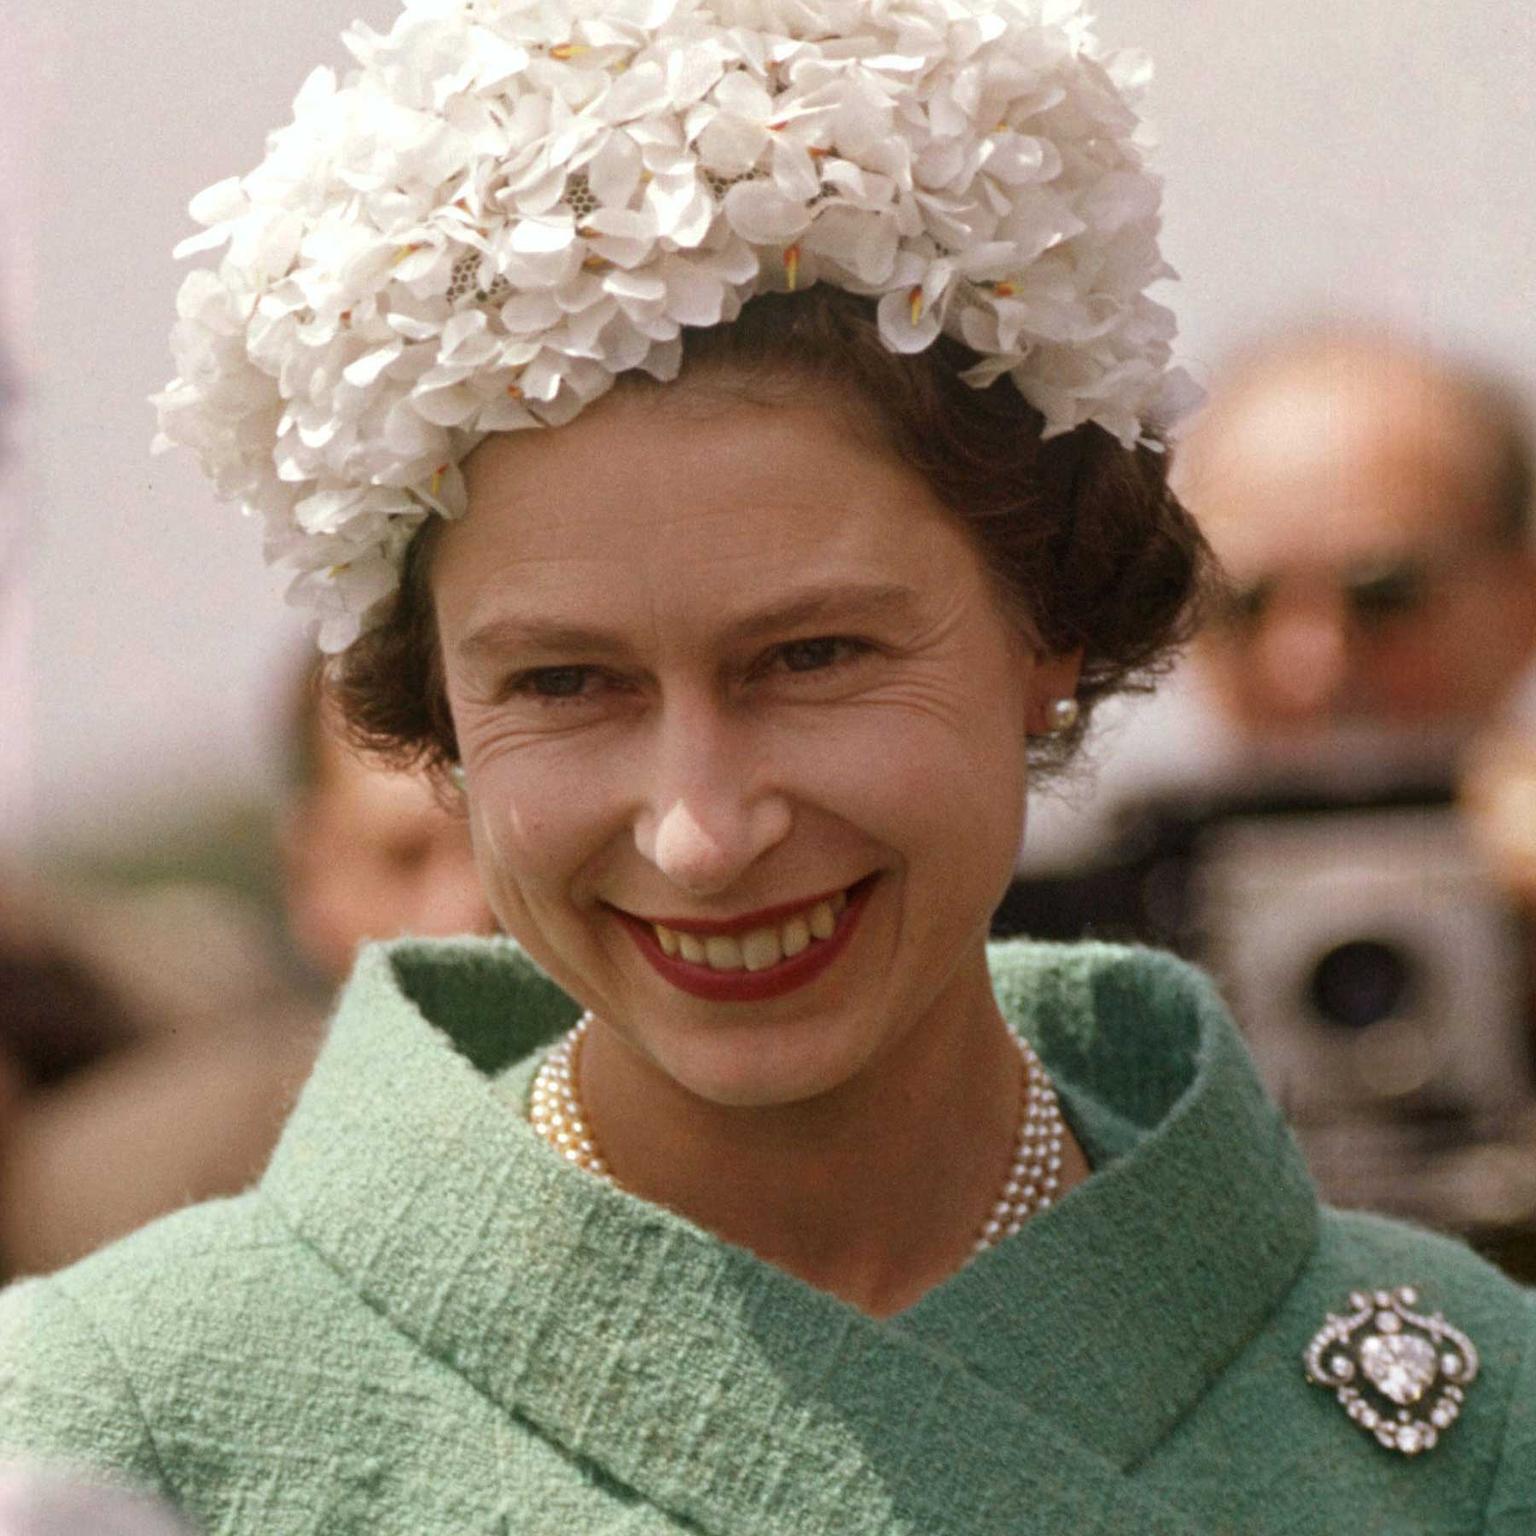 The Queen wearing the Cullinan V Heart brooch made in 1911.